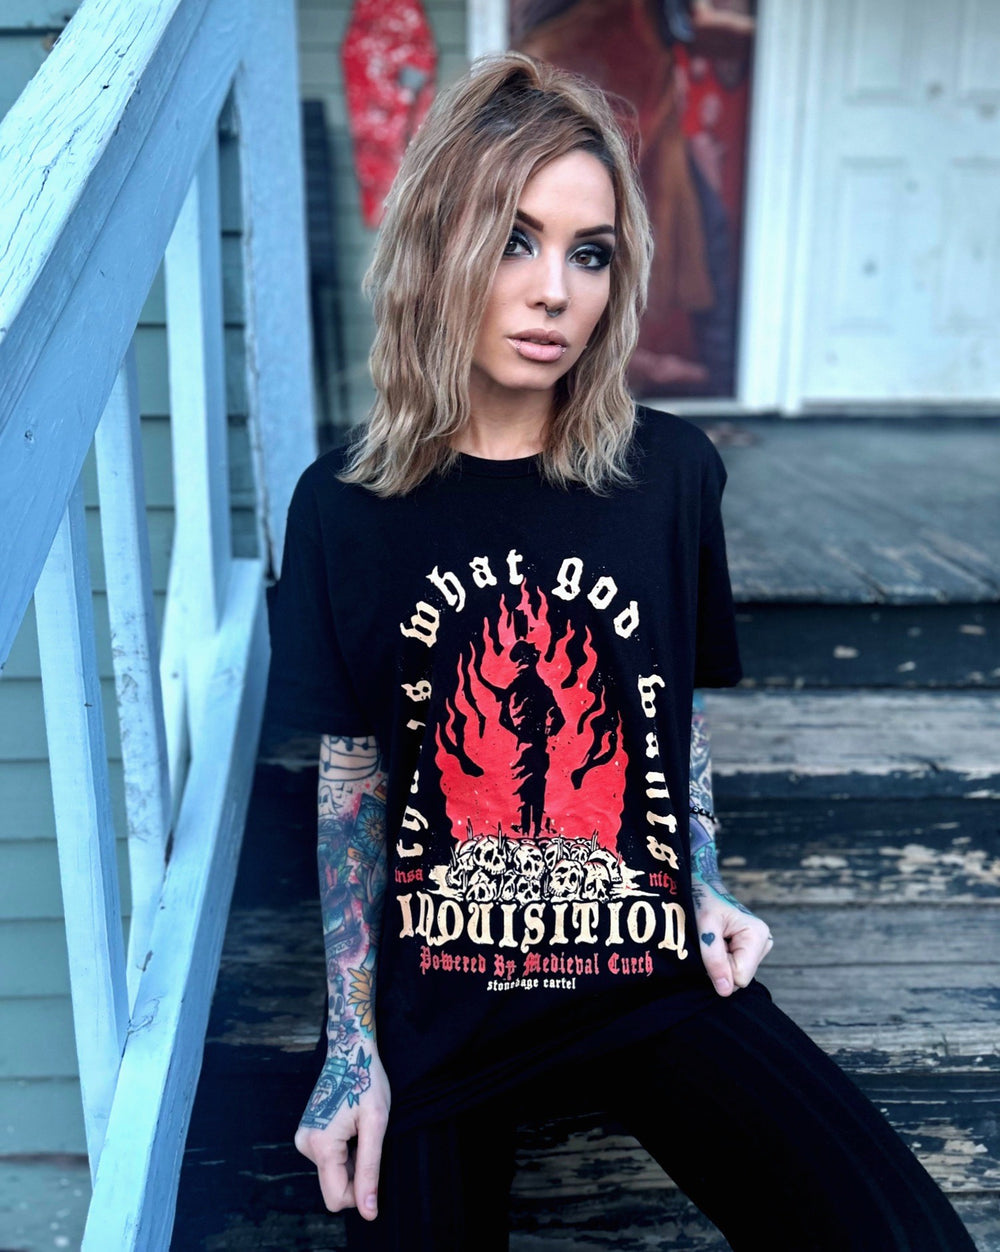 Inquisition-That's What God Wants Vintage Goth Unisex T-shirt, Anti Church Crimes Goth Graphic T-shirt Tattoo Girl Model